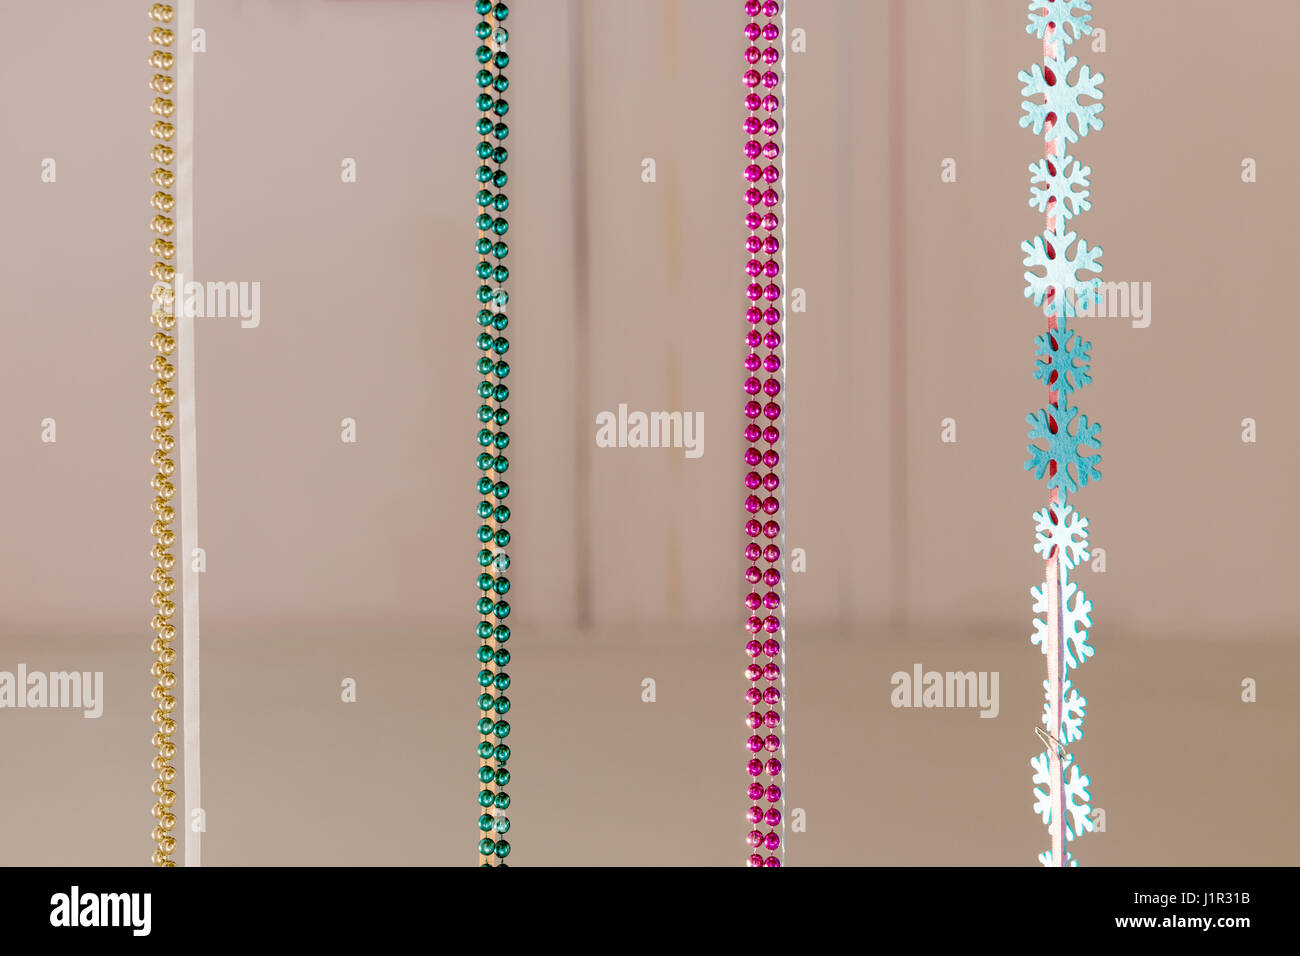 Christmas decoration colored beads hanging vertically Stock Photo